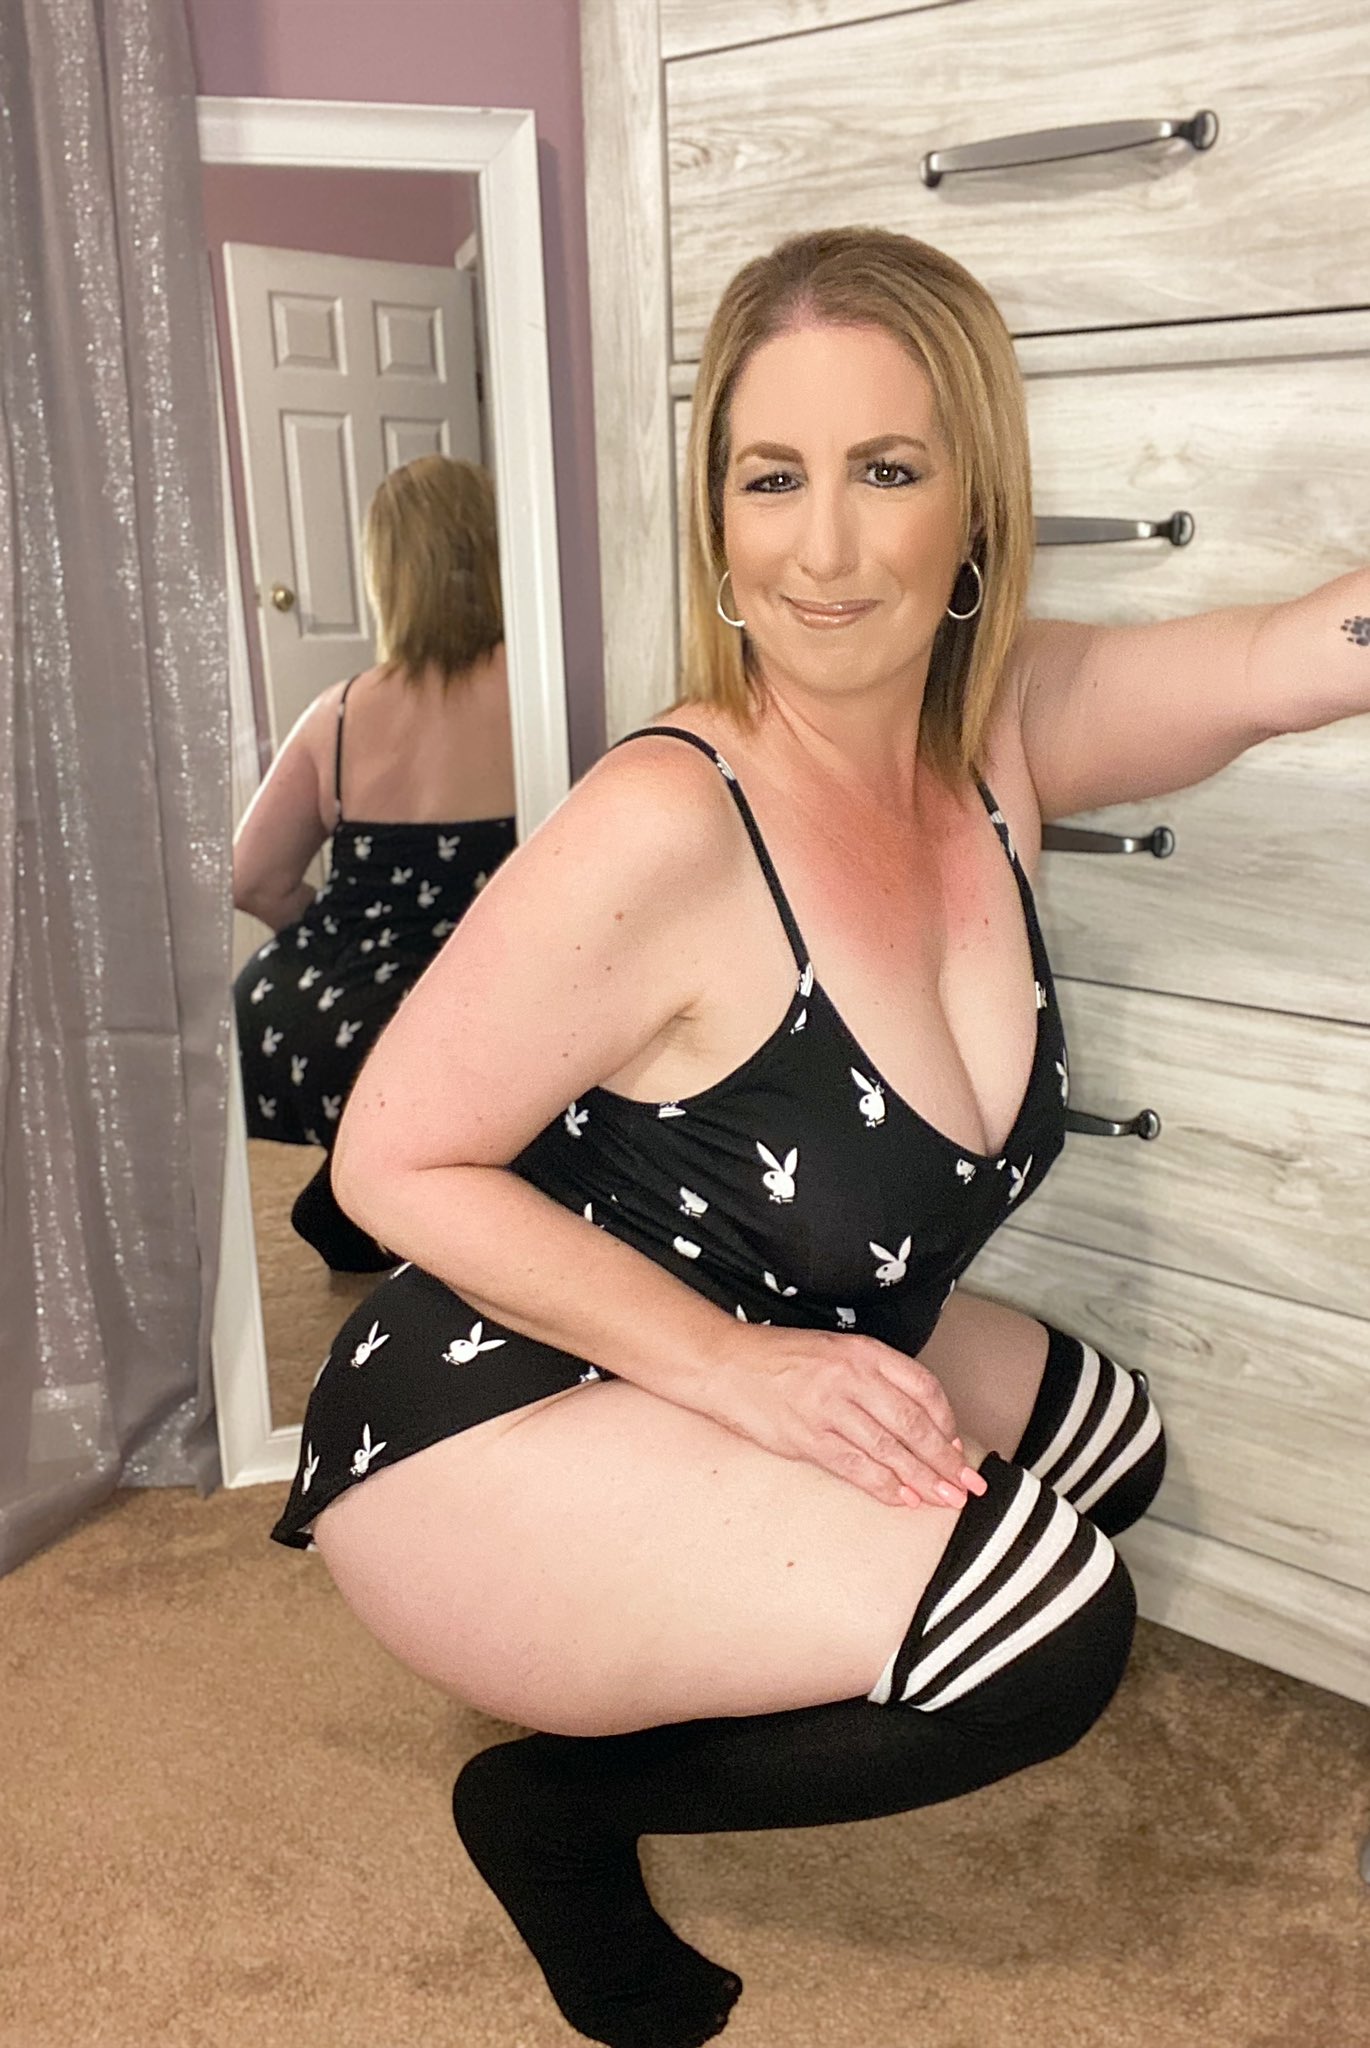 THE HOTTEST,SEXY MATURE WIDOW IS IN TOWN☺️SEXUAL EXPERIENCE❤💋🤪